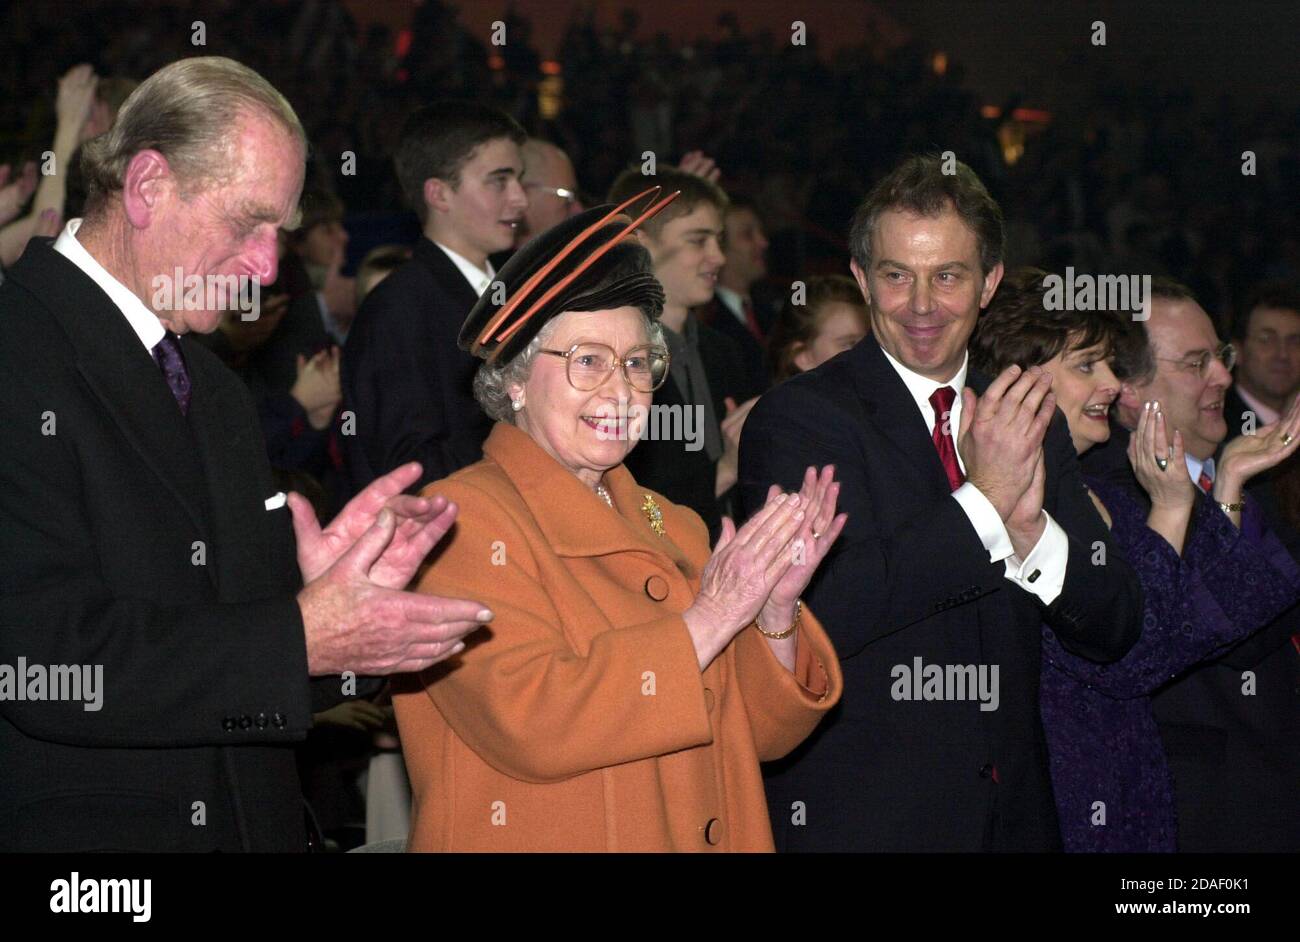 File photo of Queen Elizabeth II, the Duke of Edinburgh and the then Prime Minister Tony Blair at the opening ceremony of the Millennium Dome in Greenwich, London. Stock Photo